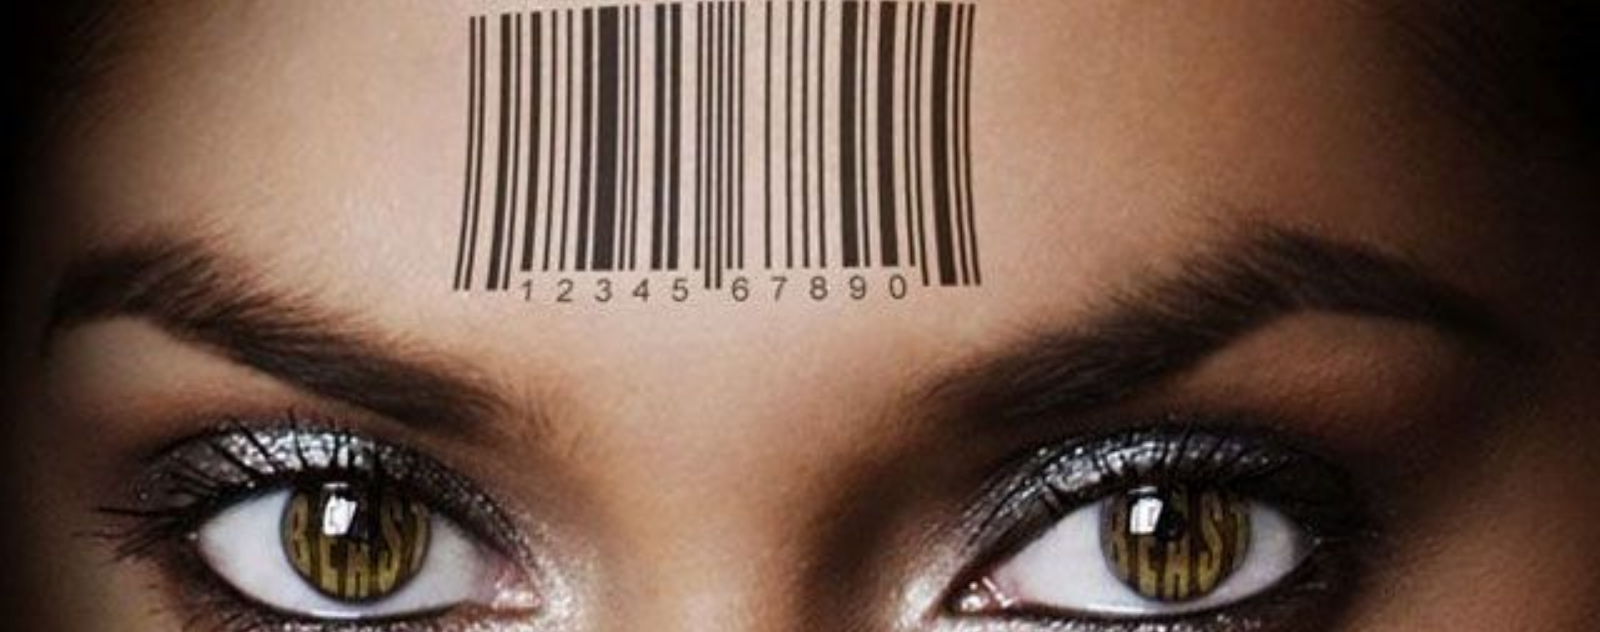 mark of the beast barcode